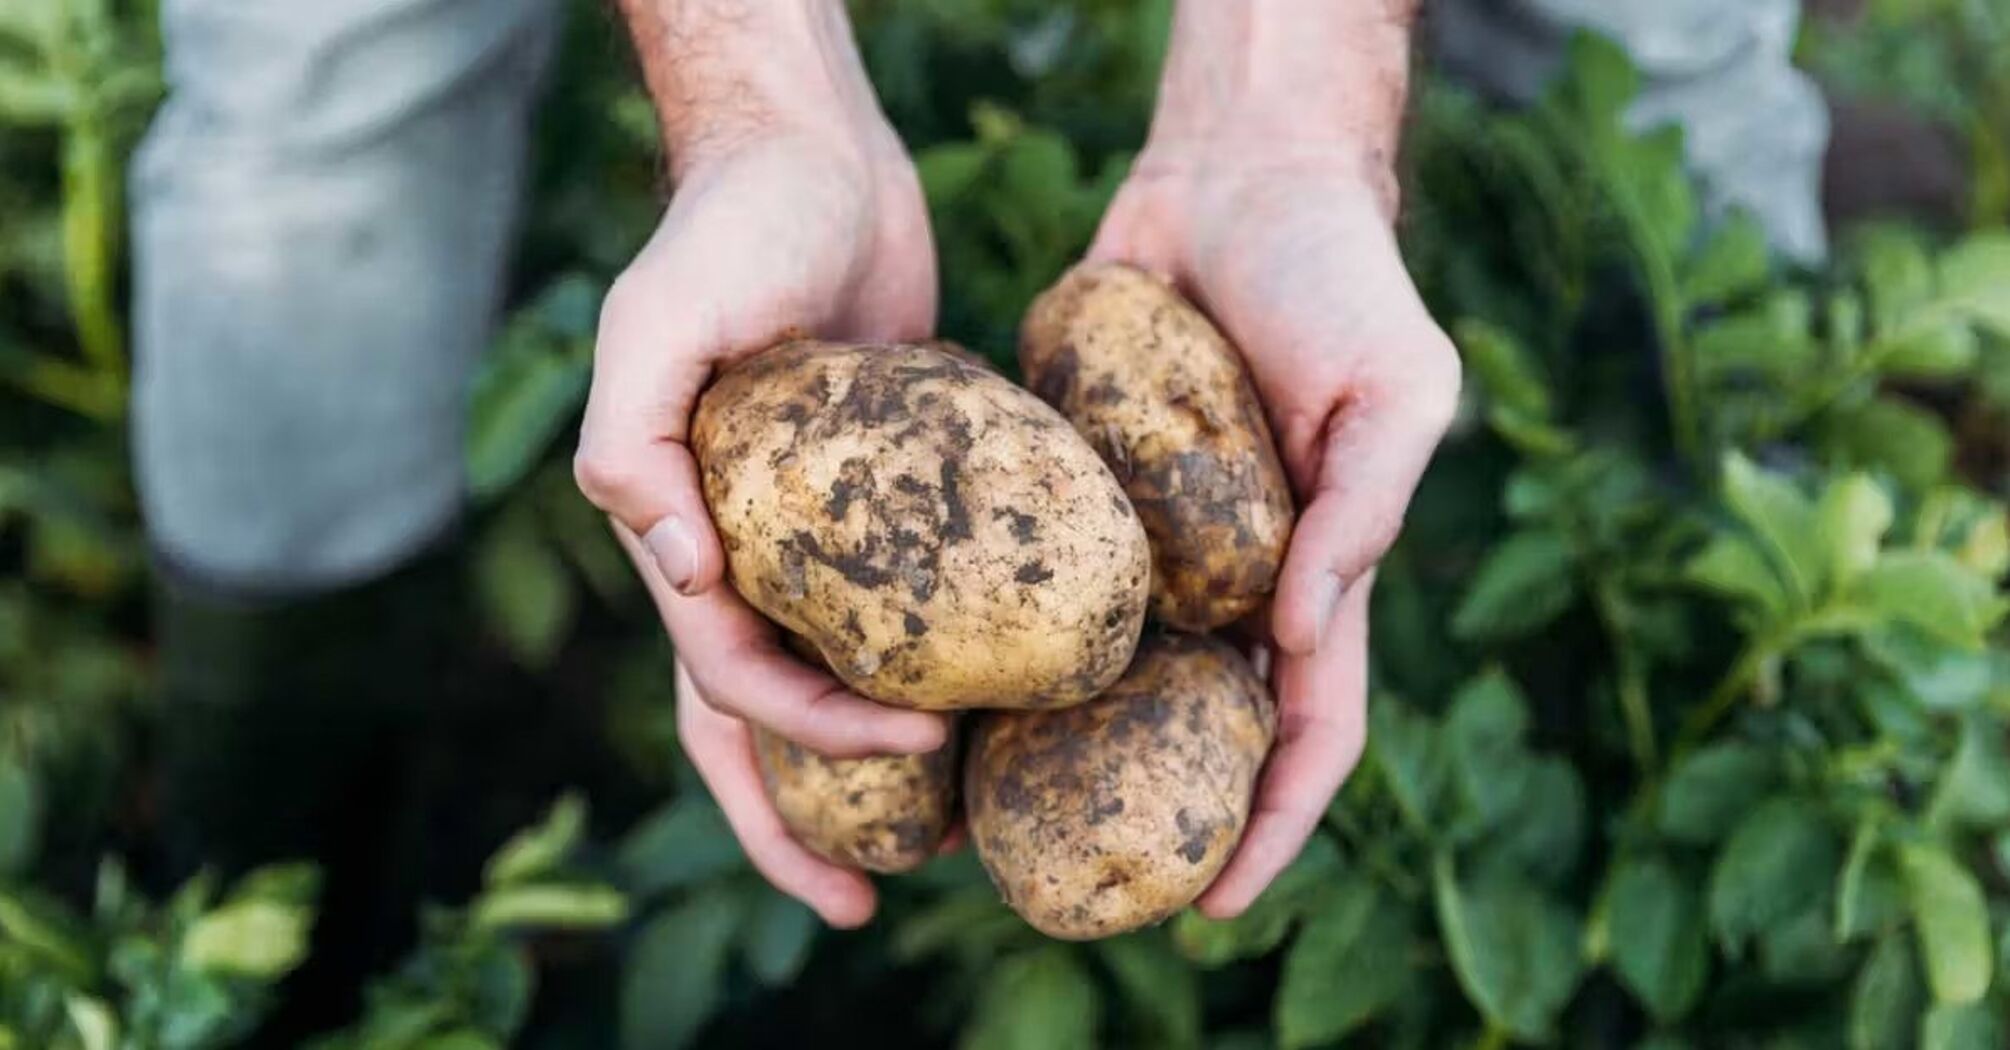 How to store potatoes correctly to prevent spoilage